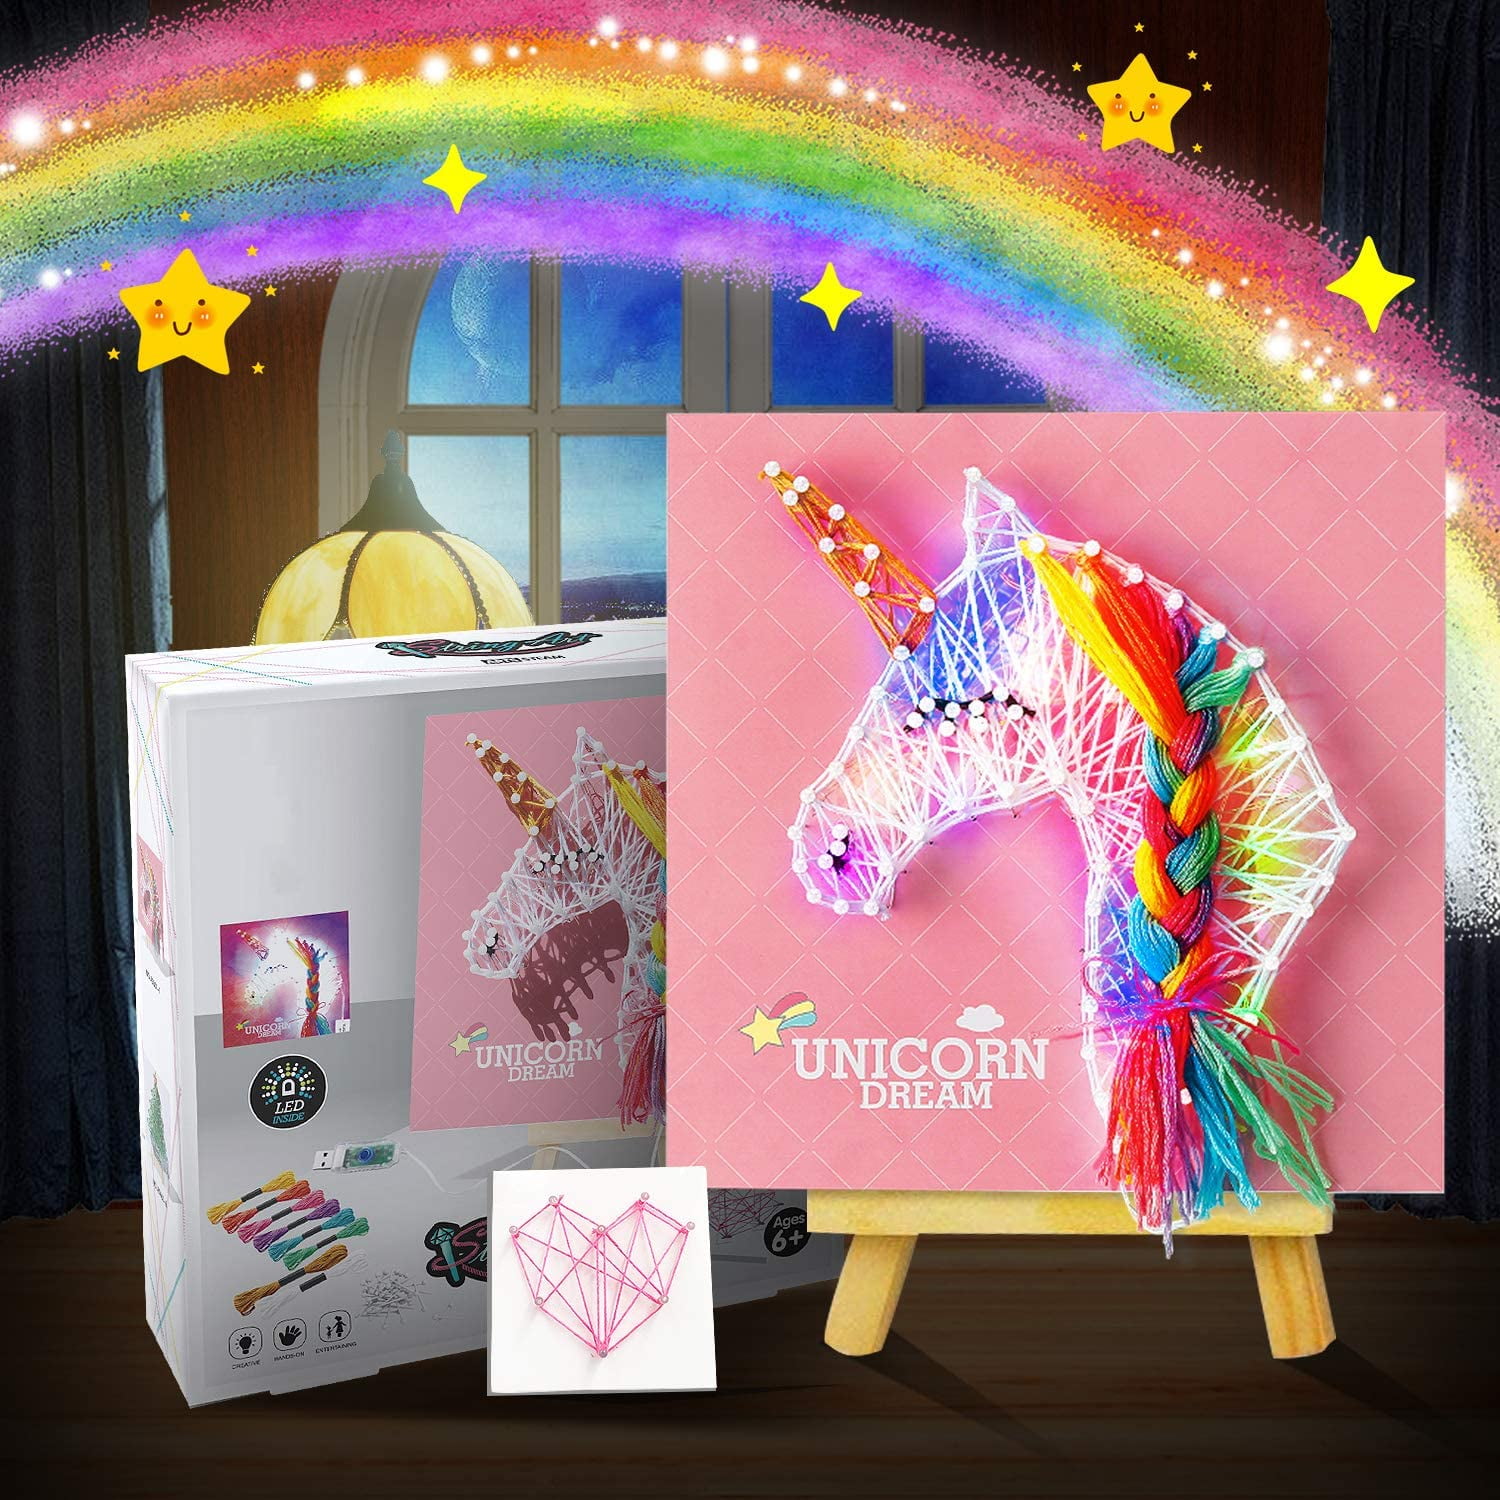  STEM-Accredited Unicorn Painting Kit for Kids - Paint